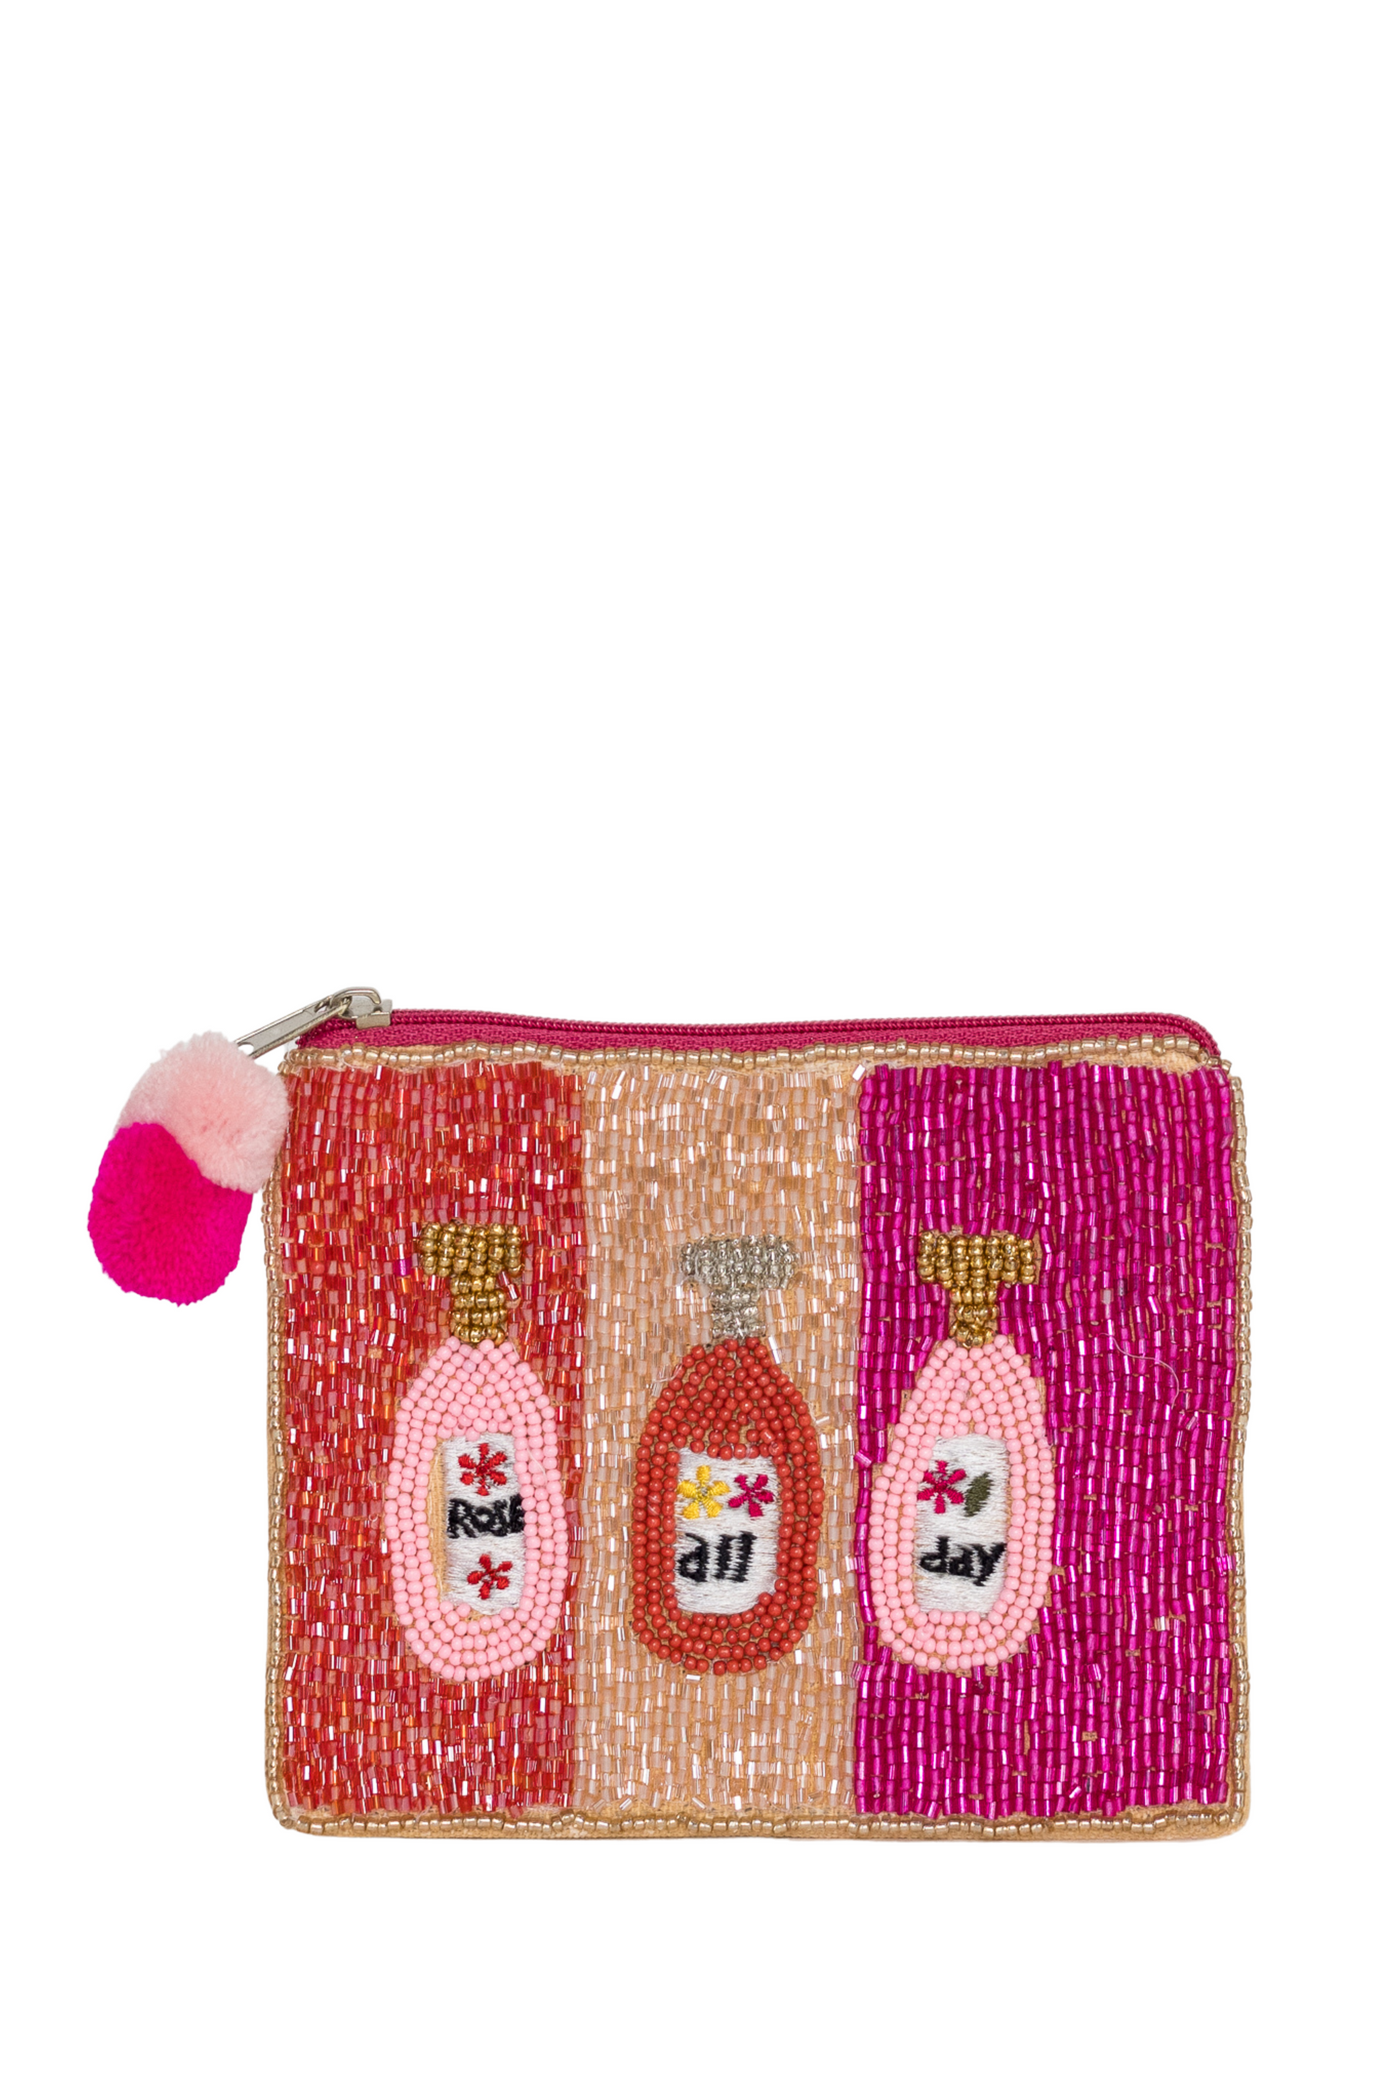 Rosé All Day Beaded Pouch